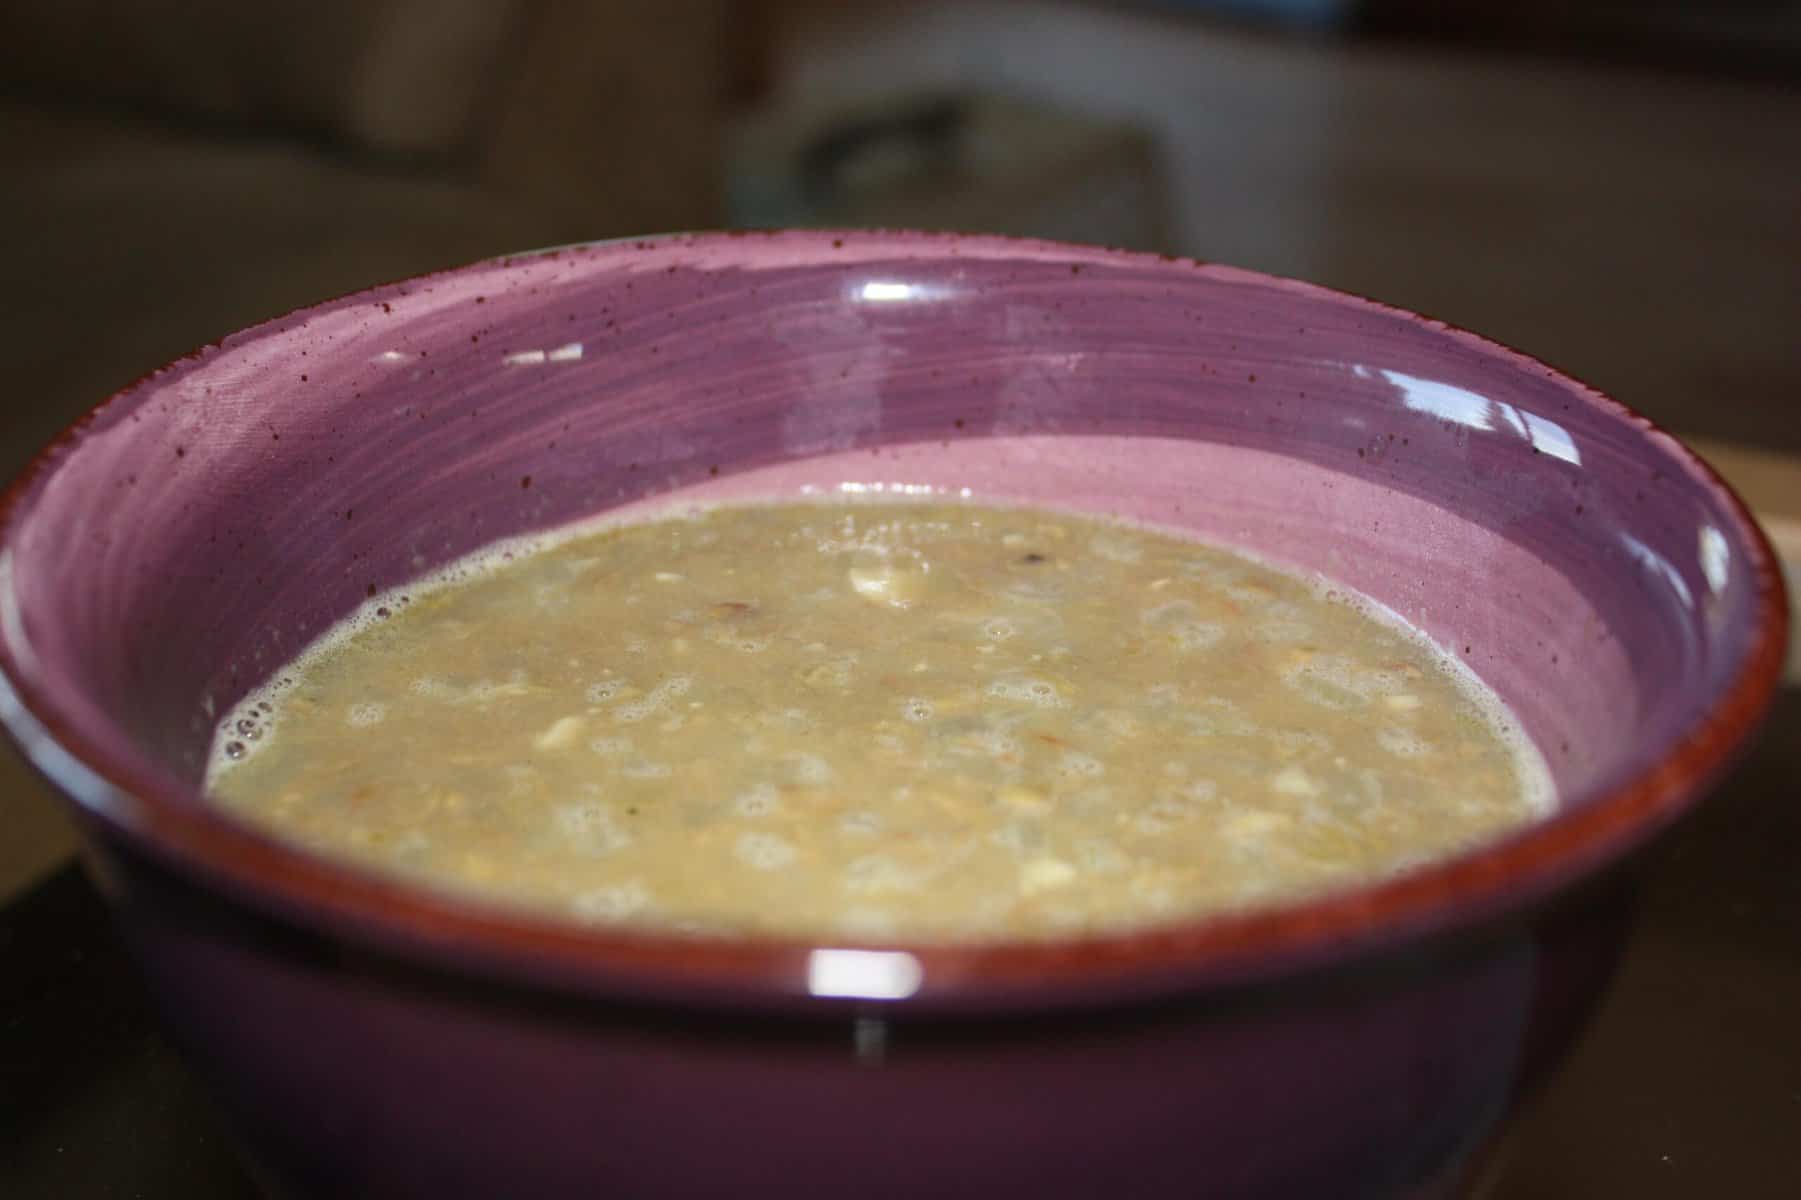 Take-Out Lentil Soup With Garlic and Cumin